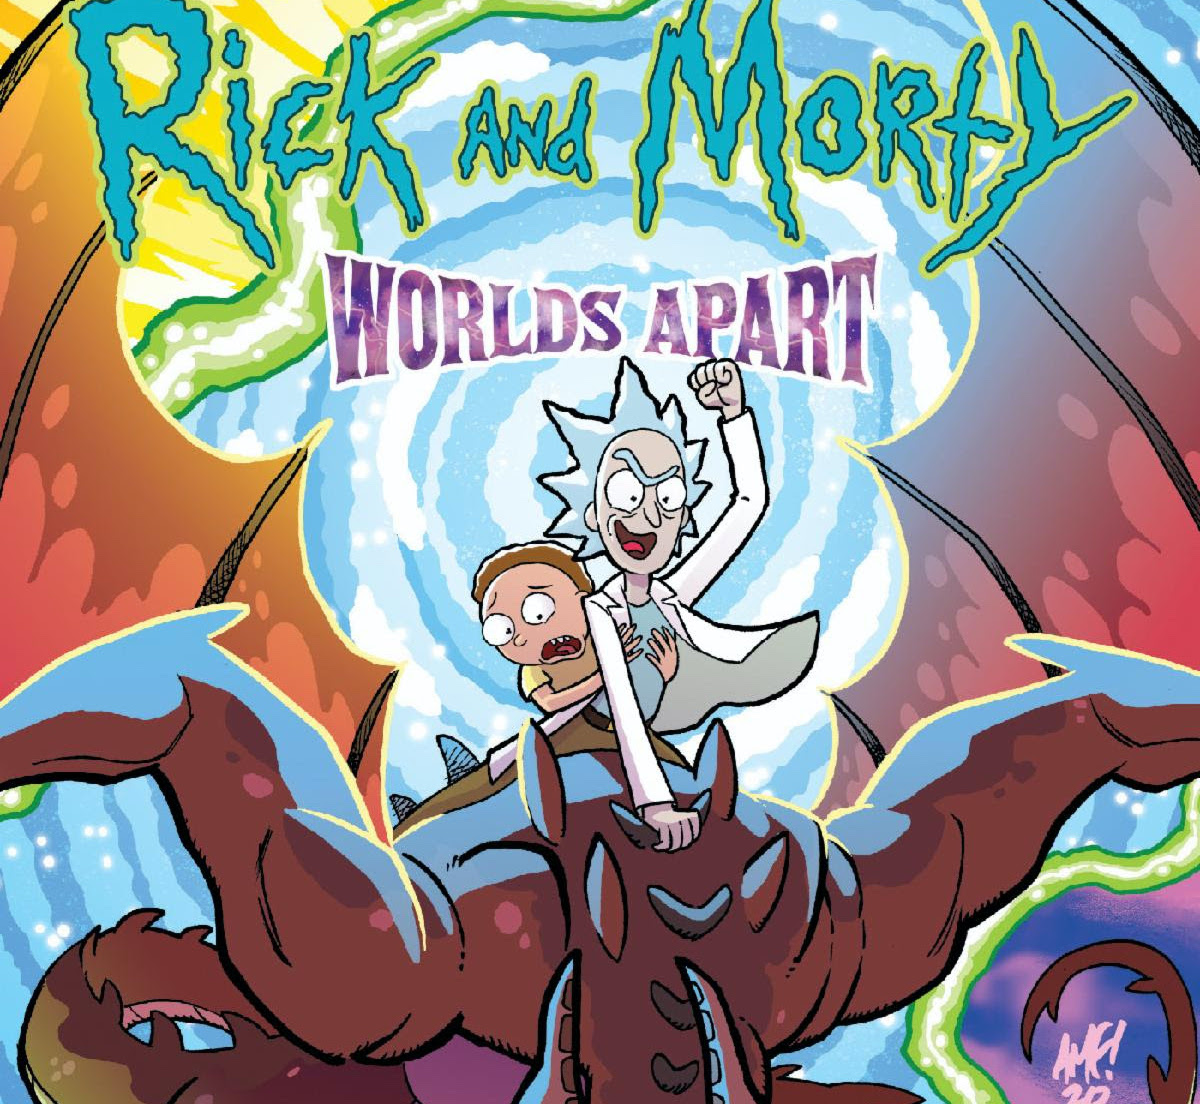 Oni Press launching 'Rick and Morty: Worlds Apart' for February 2021